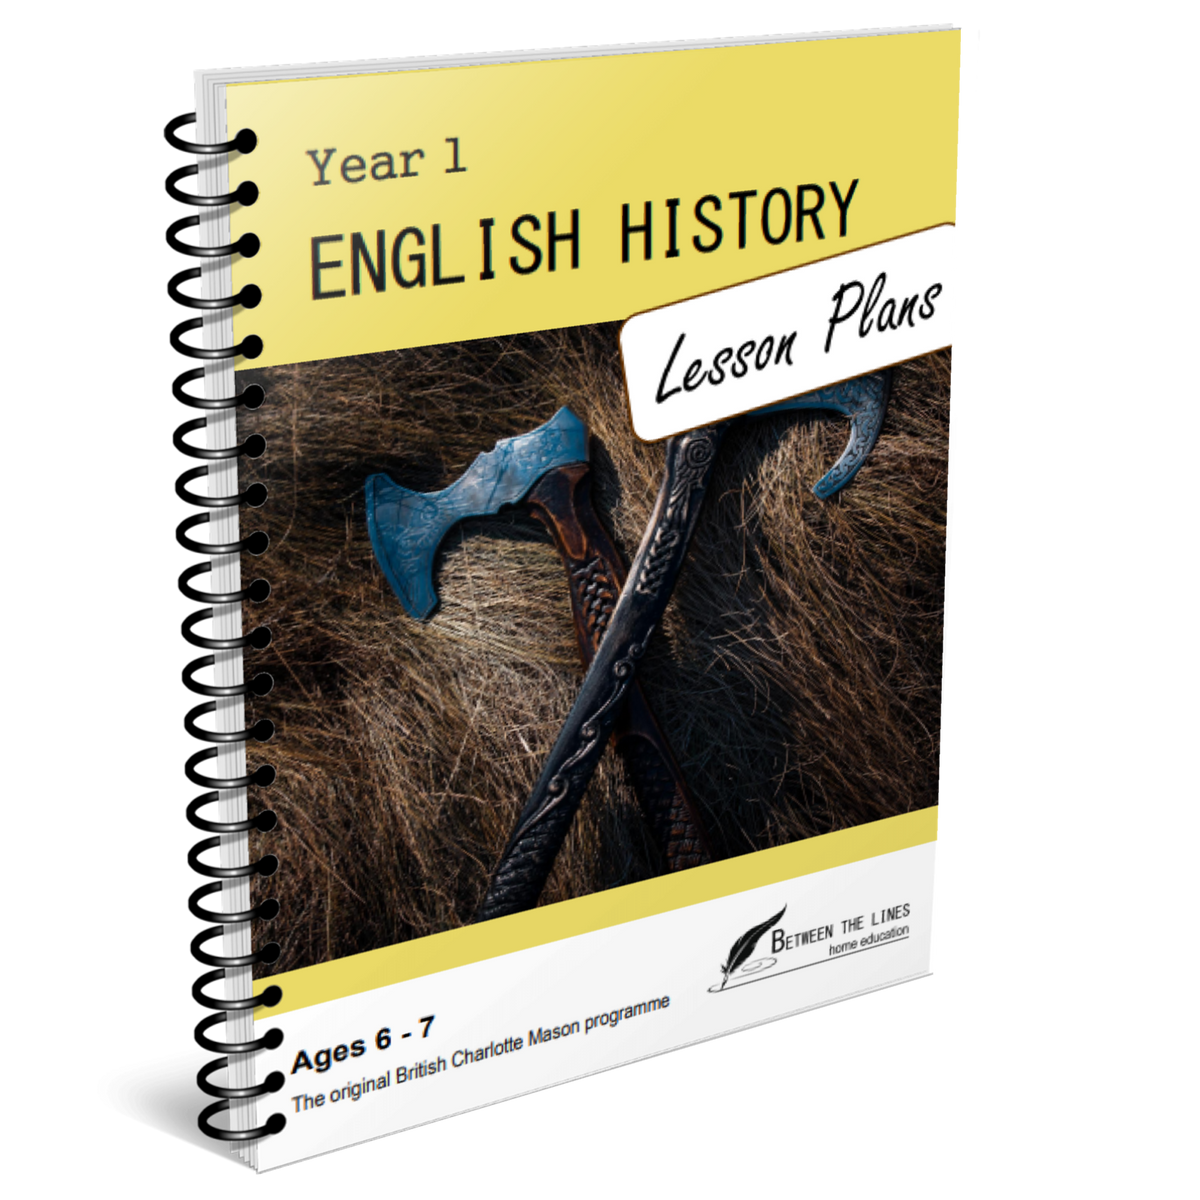 year-1-english-history-lesson-plans-between-the-lines-home-education